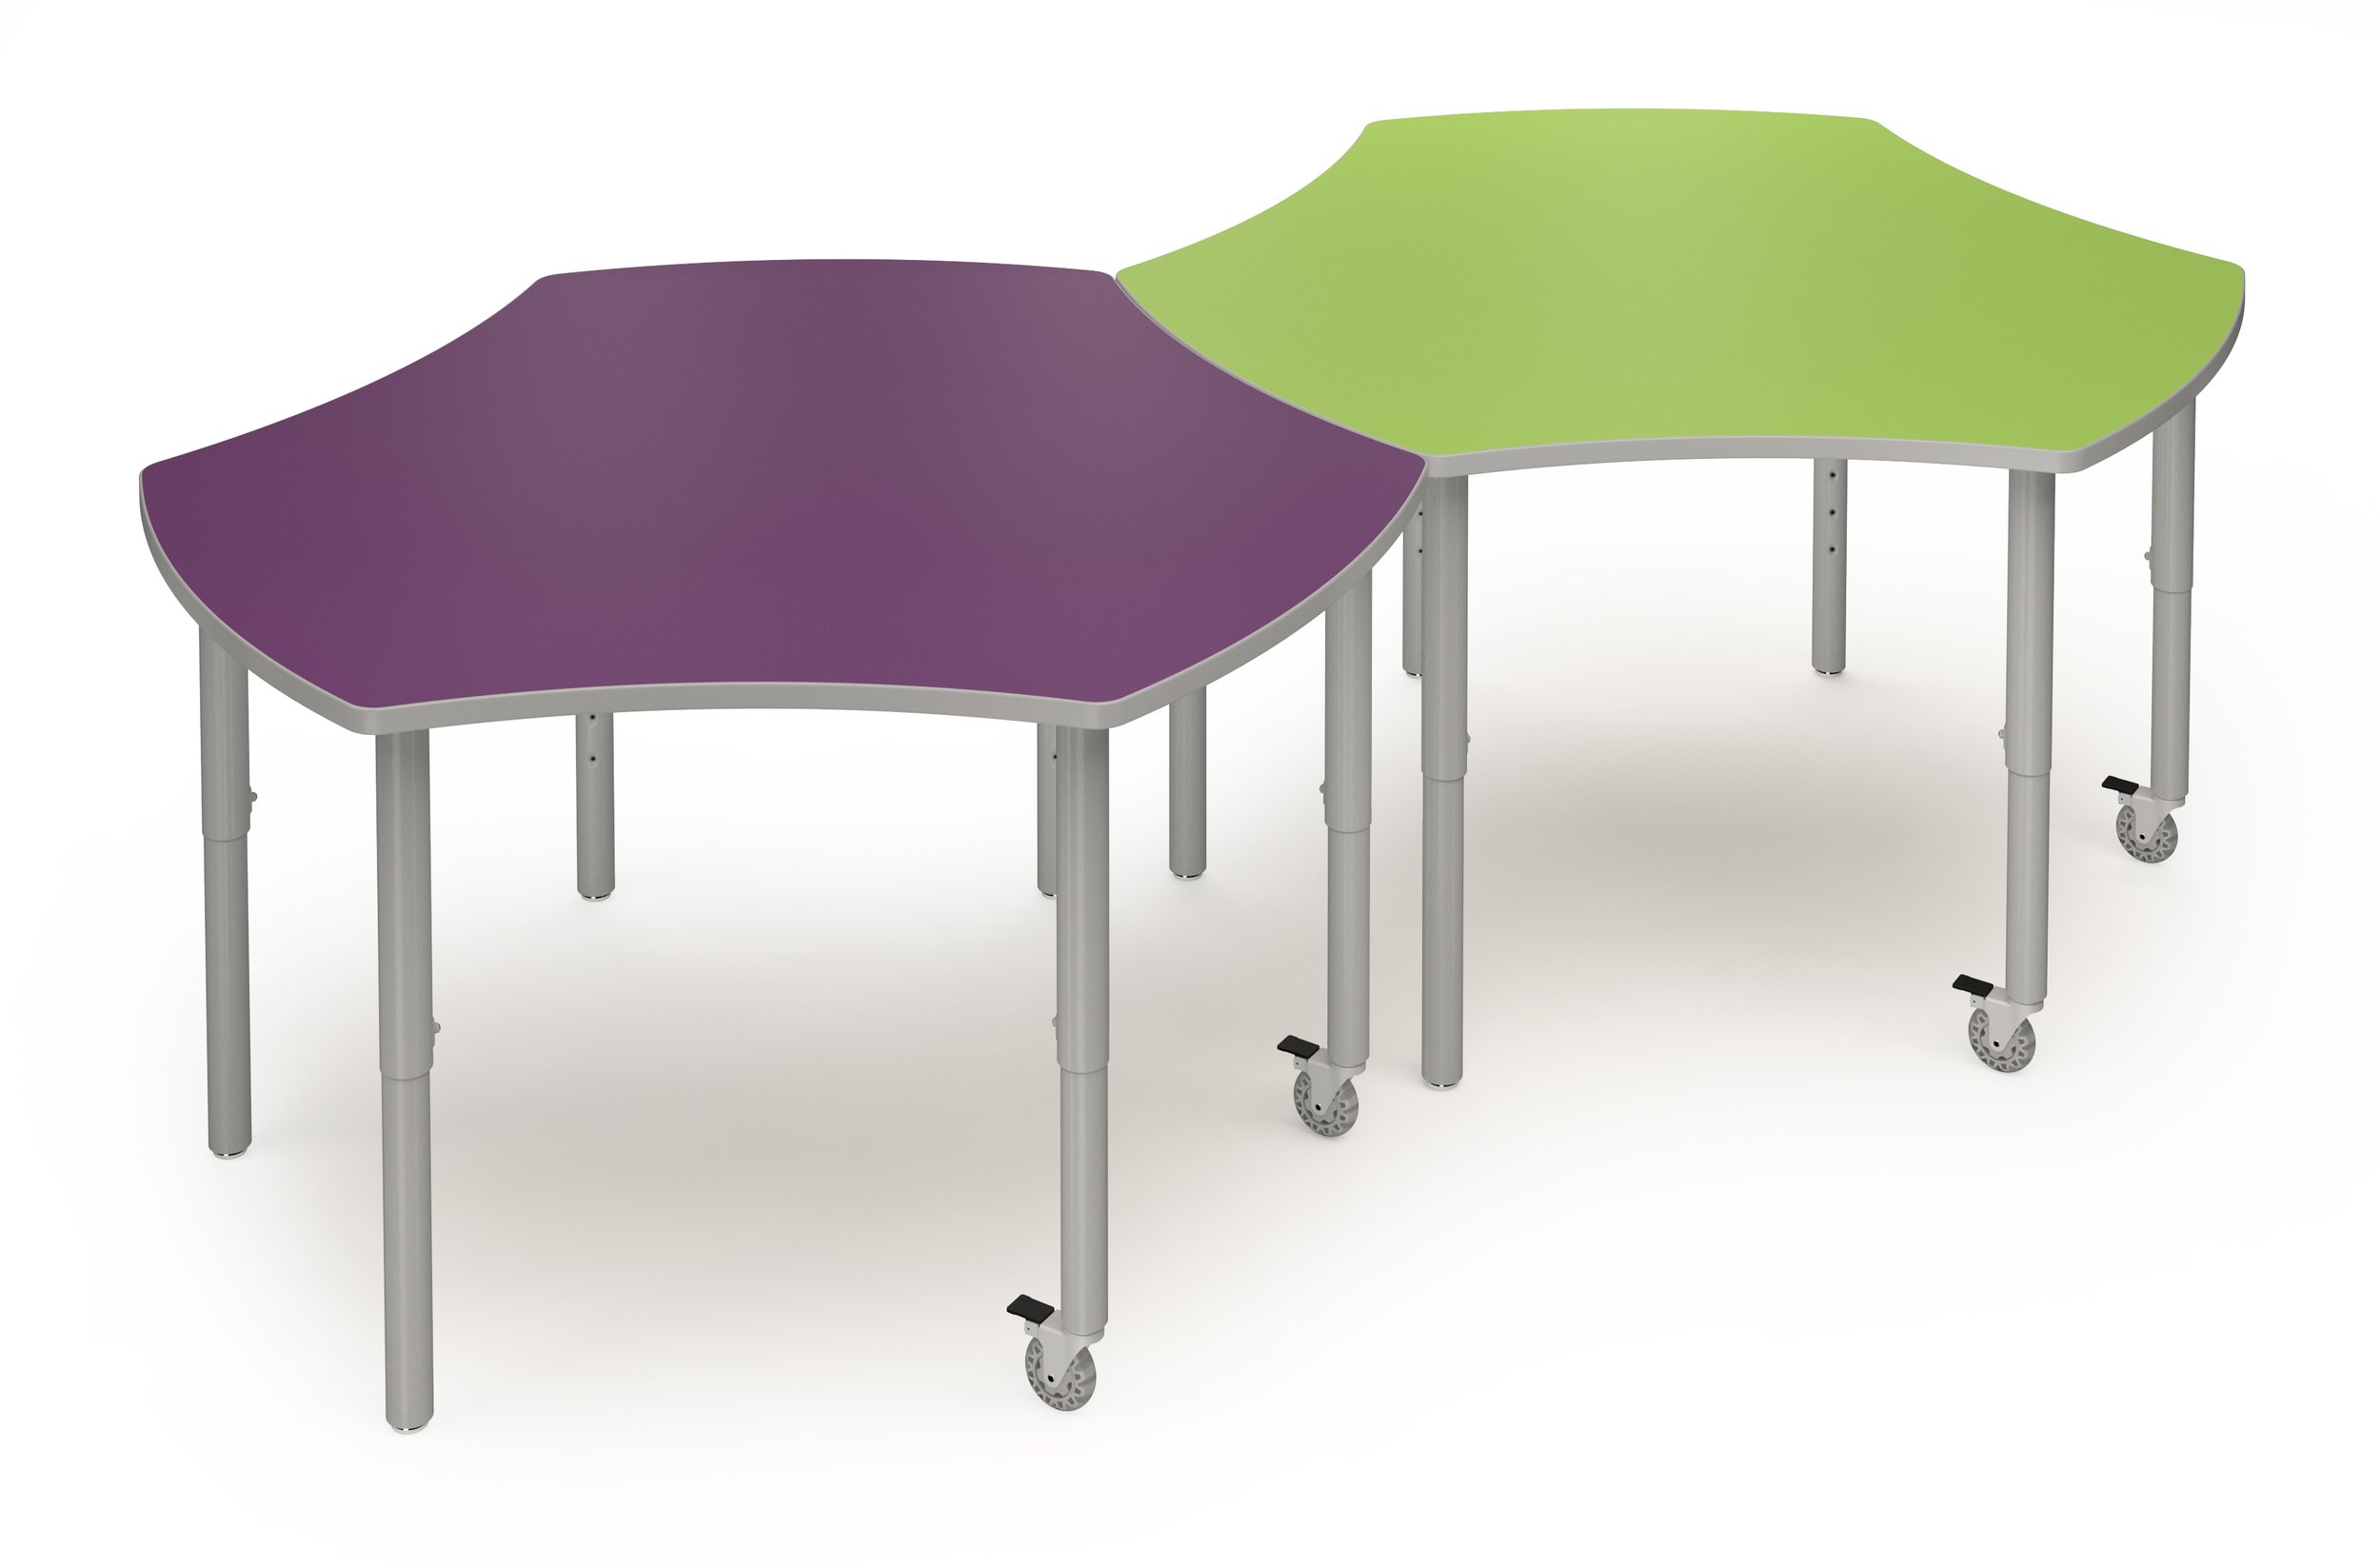 Core Table